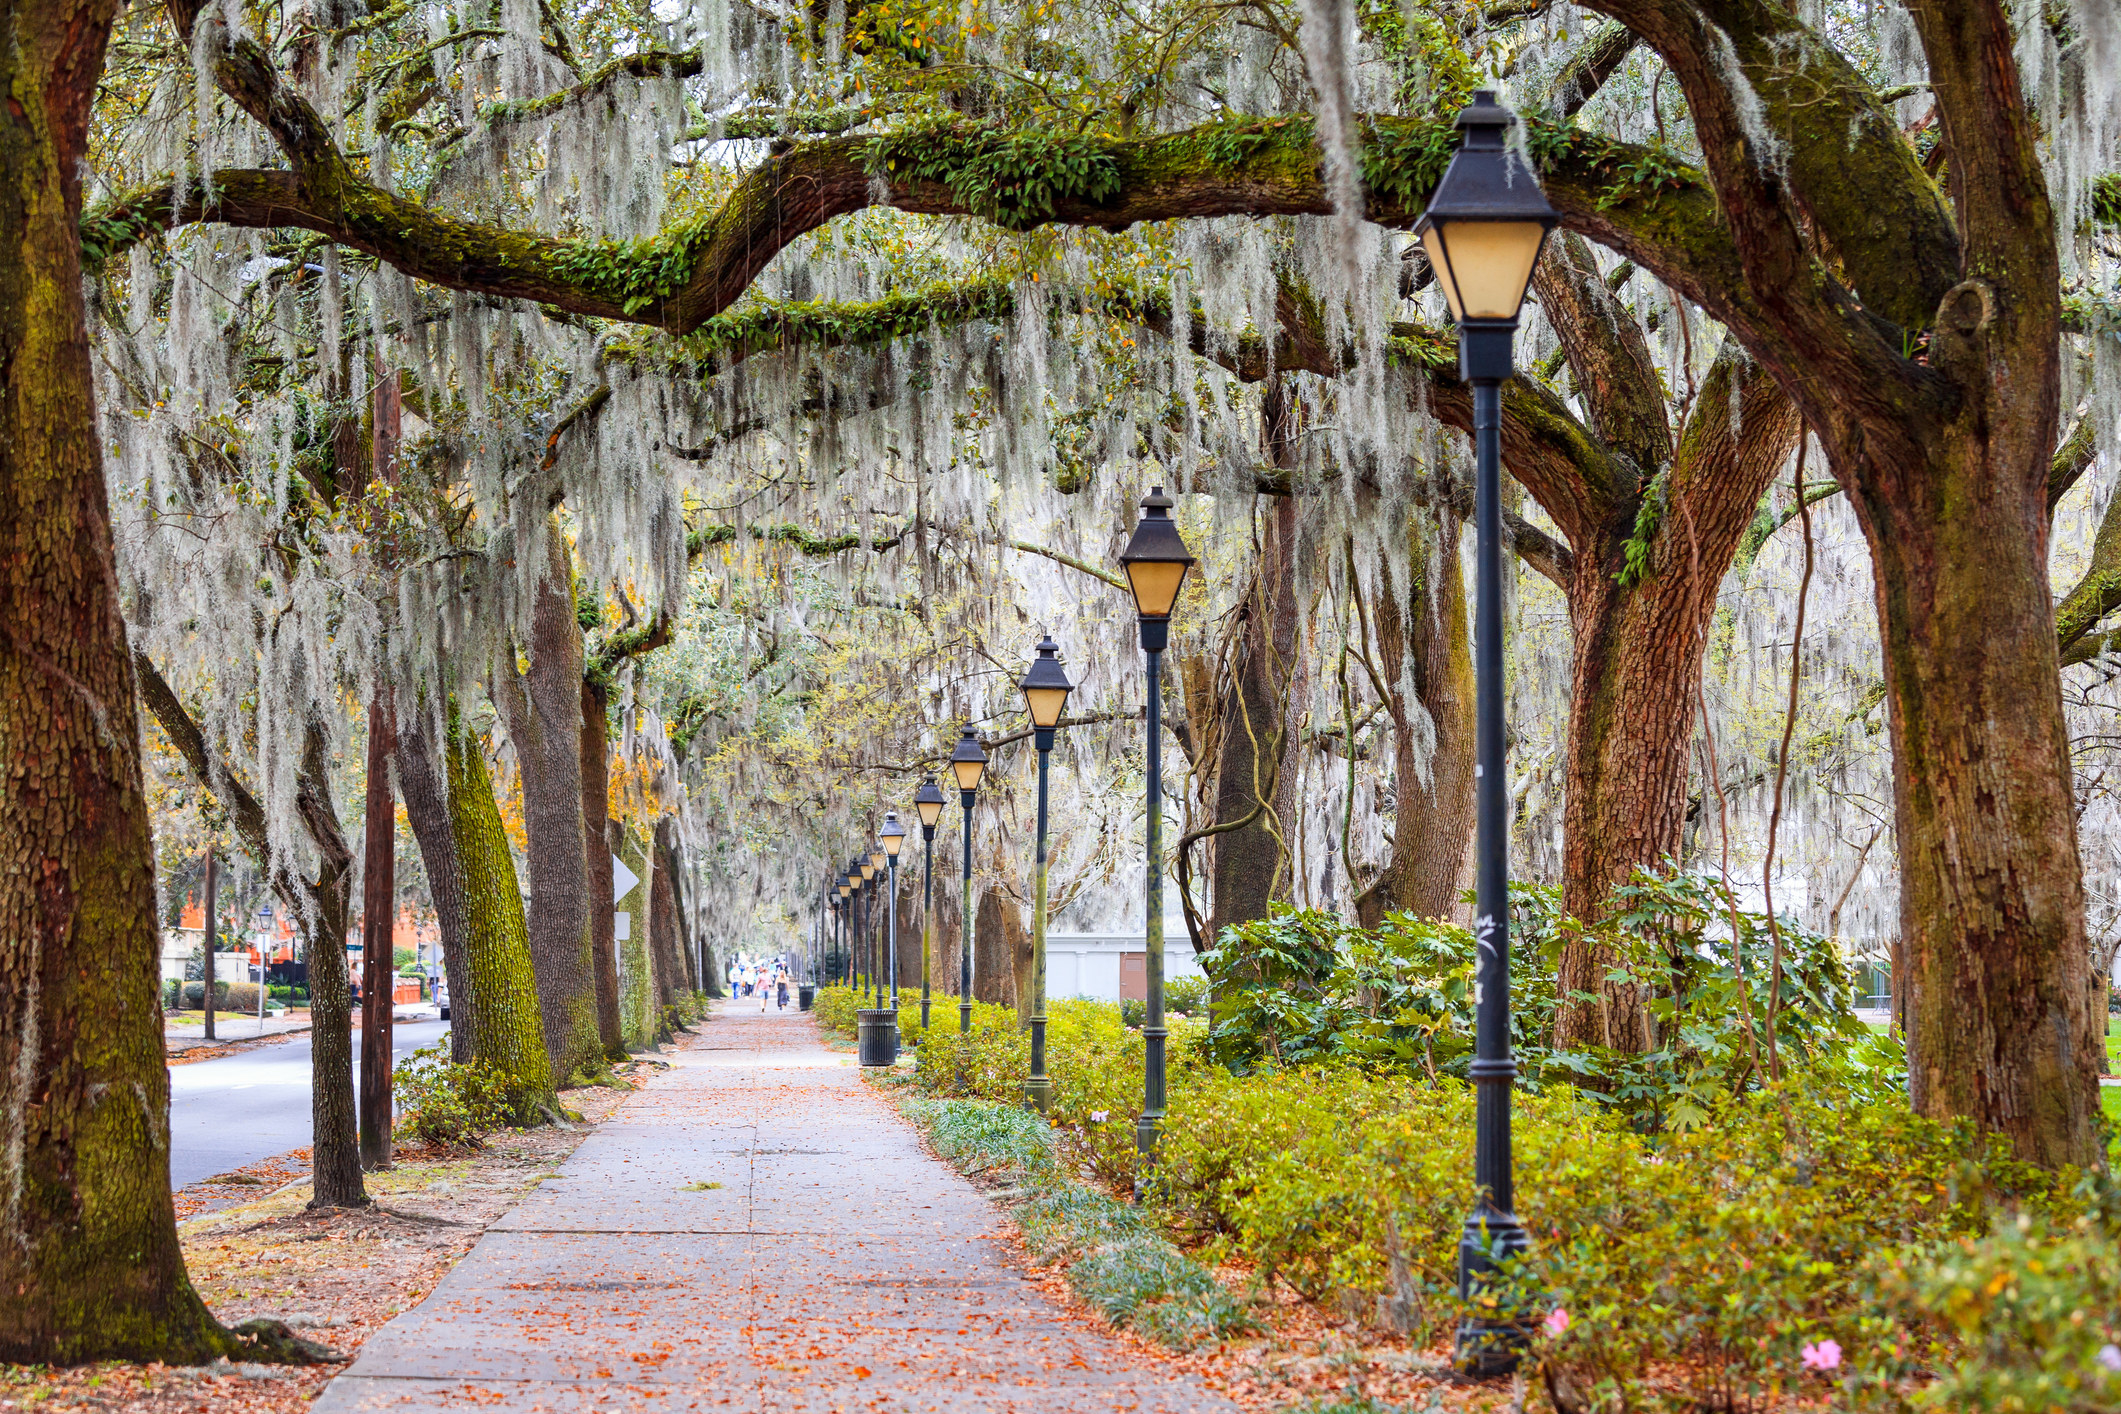 A quiet street in Savannah with rows of Spanish moss